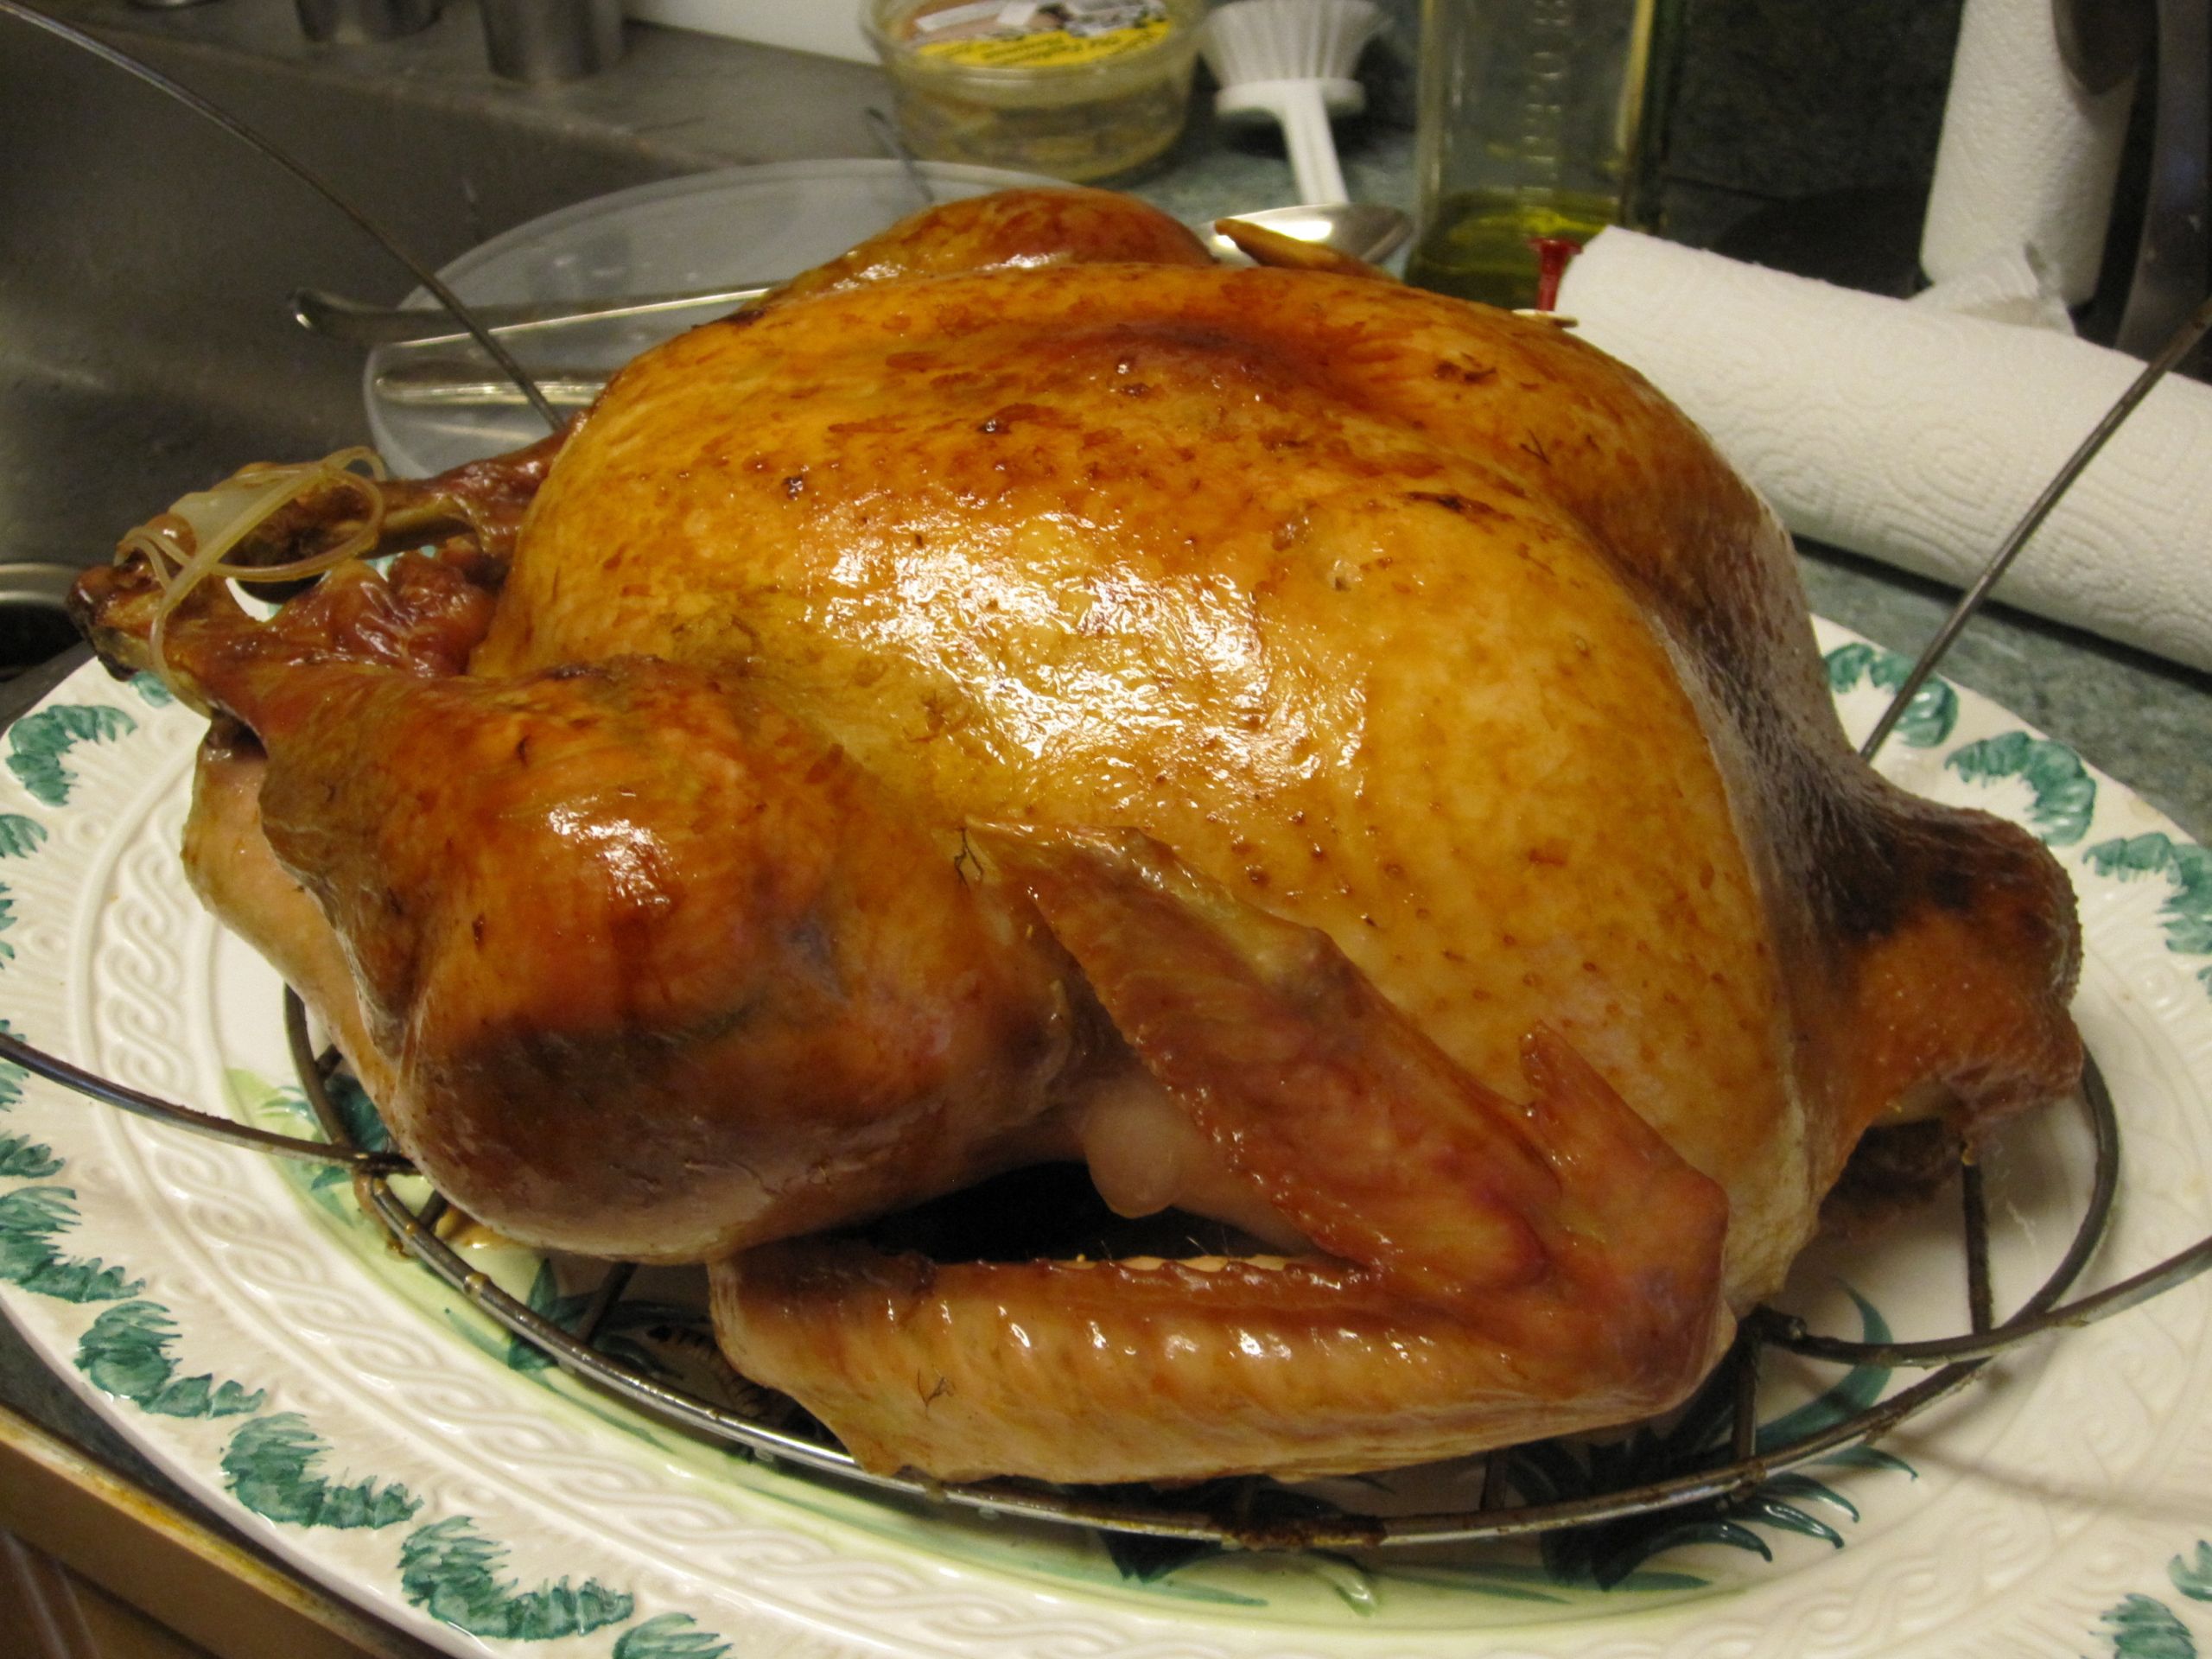 Buy A Cooked Turkey For Thanksgiving
 The top 30 Ideas About order Cooked Thanksgiving Turkey